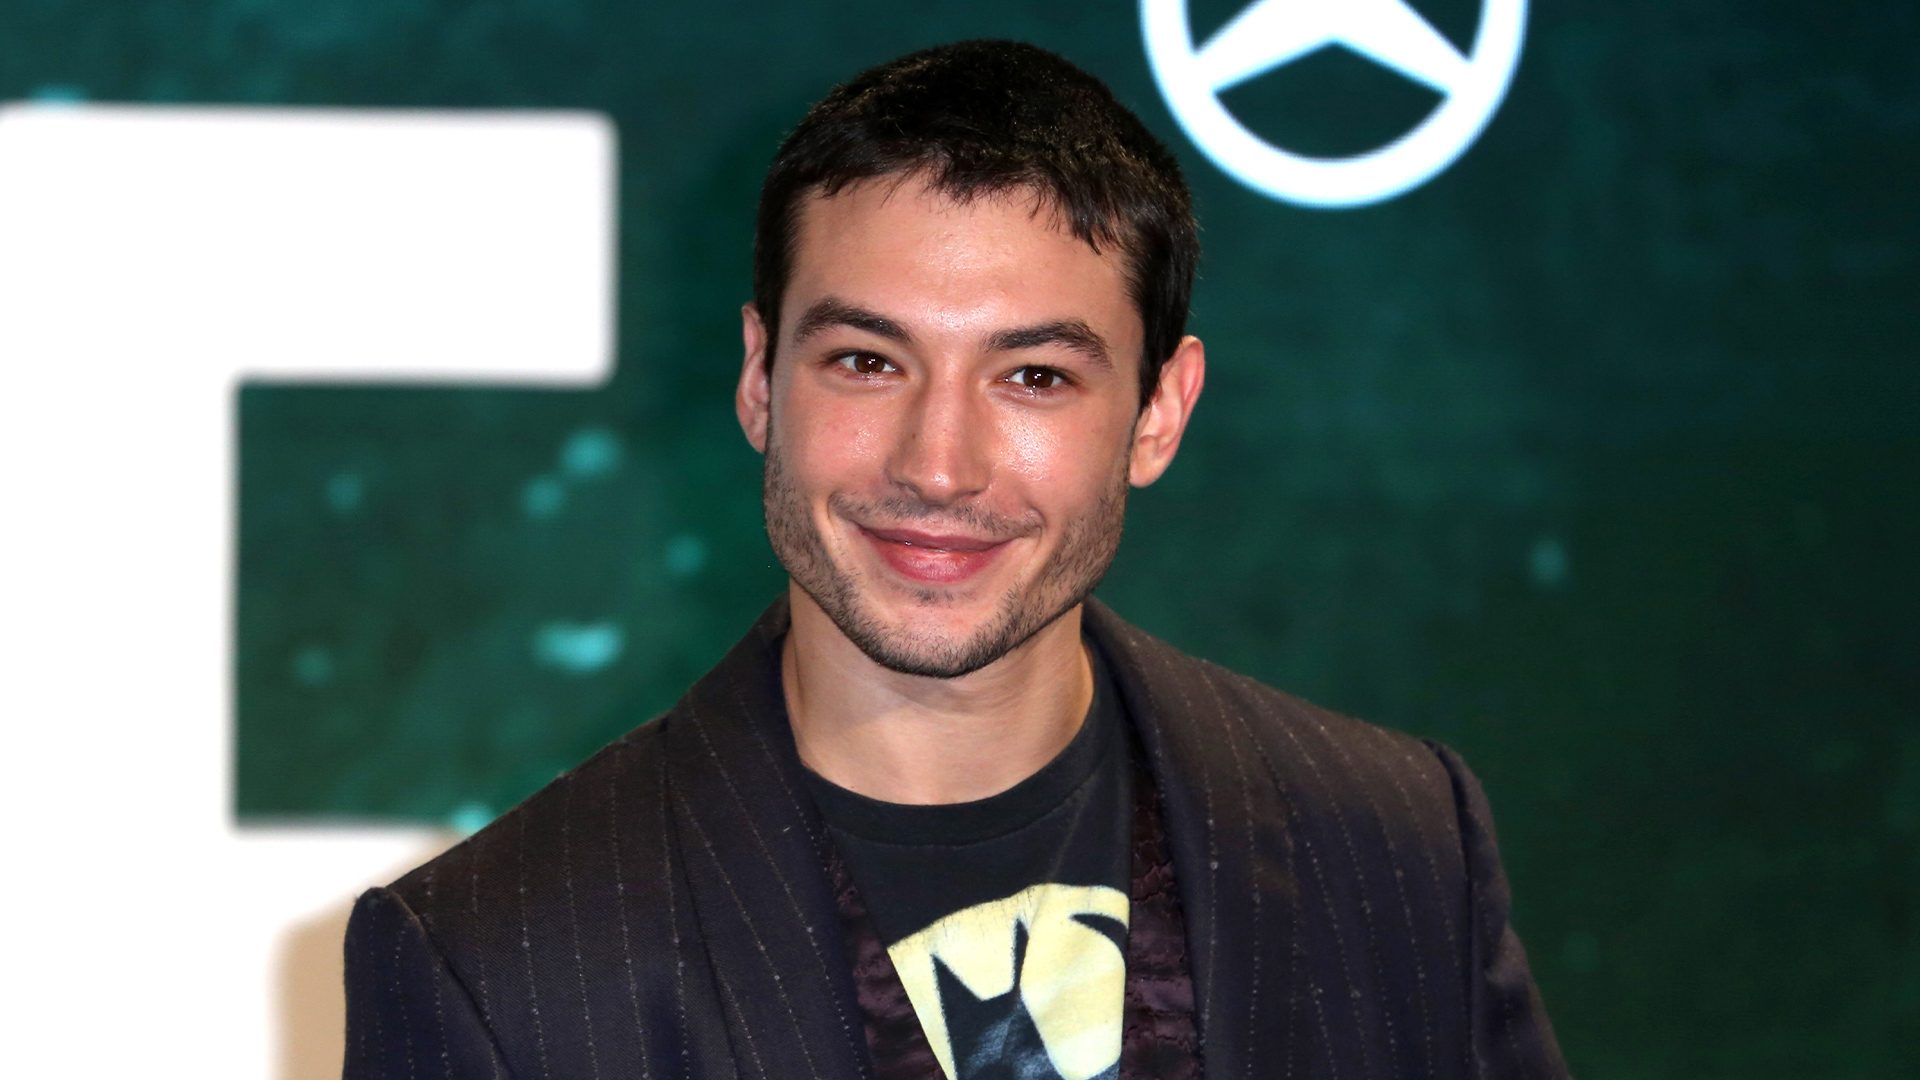 DC star Ezra Miller charged with felony burglary for reportedly stealing alcohol